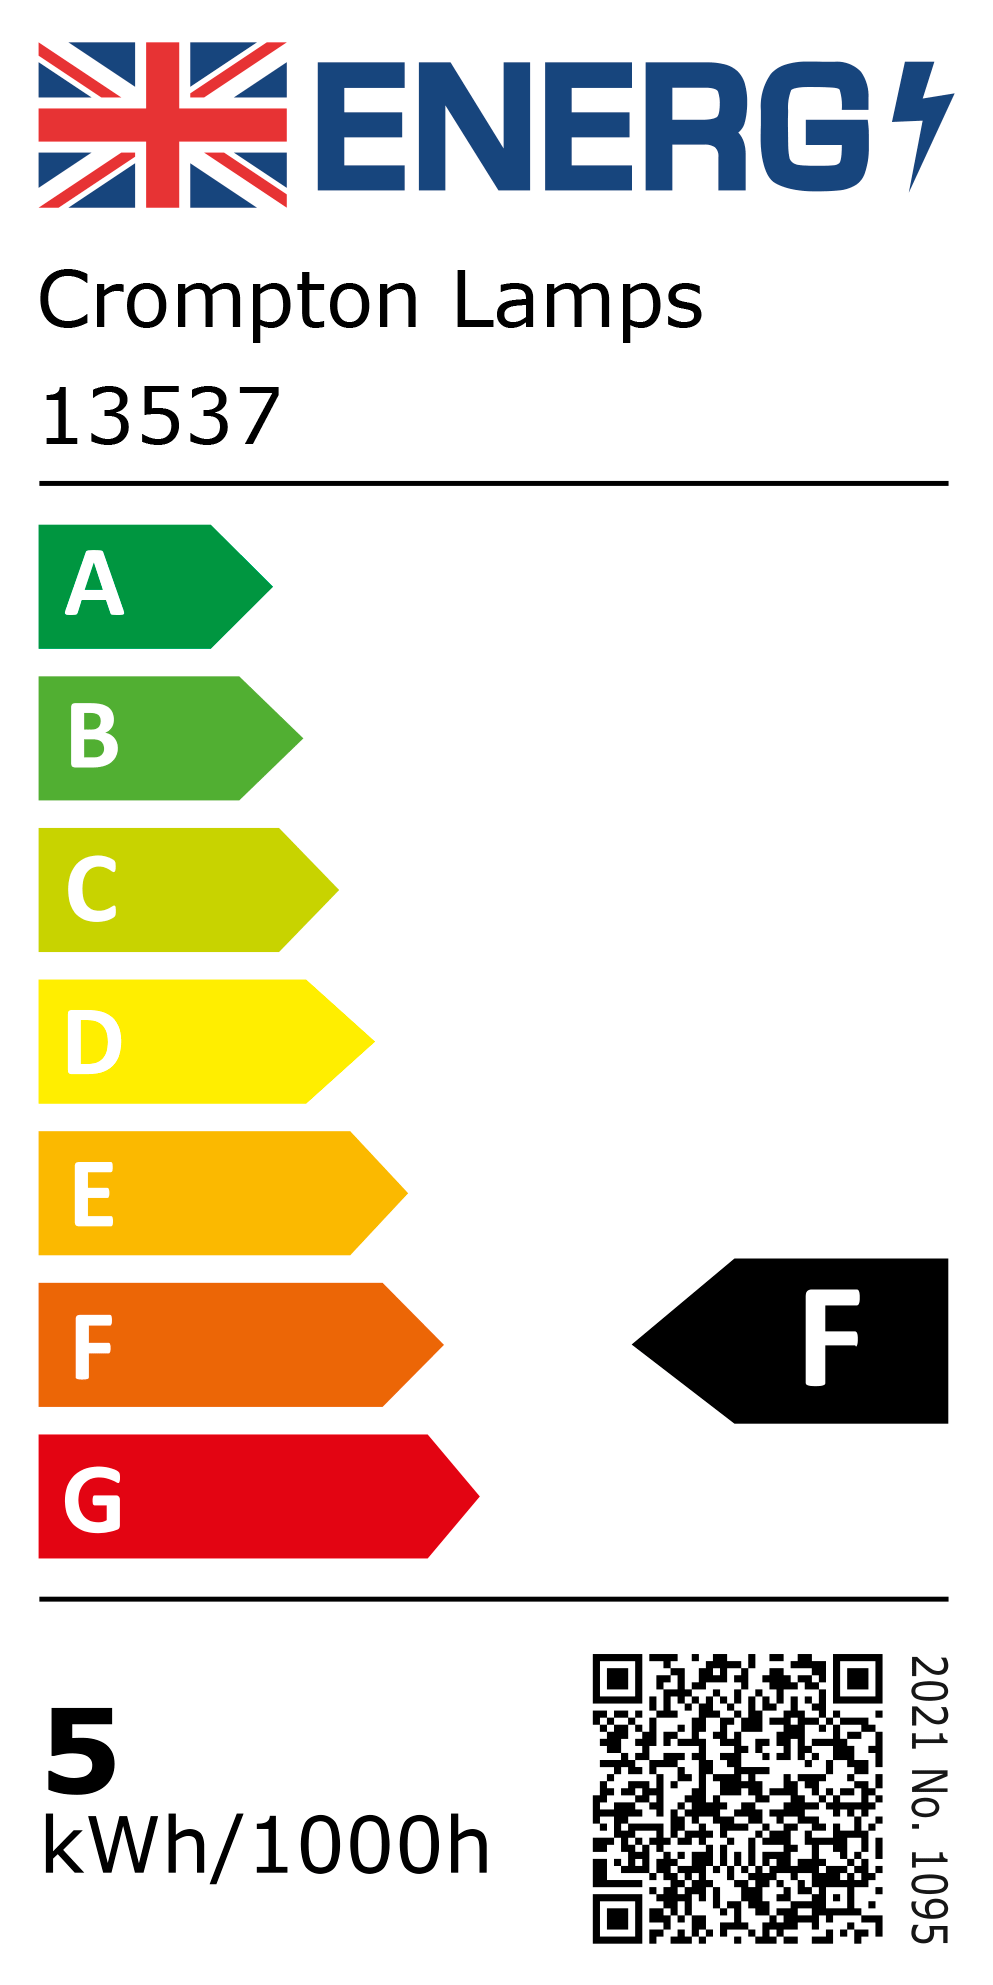 New 2021 Energy Rating Label: Stock Code 13537